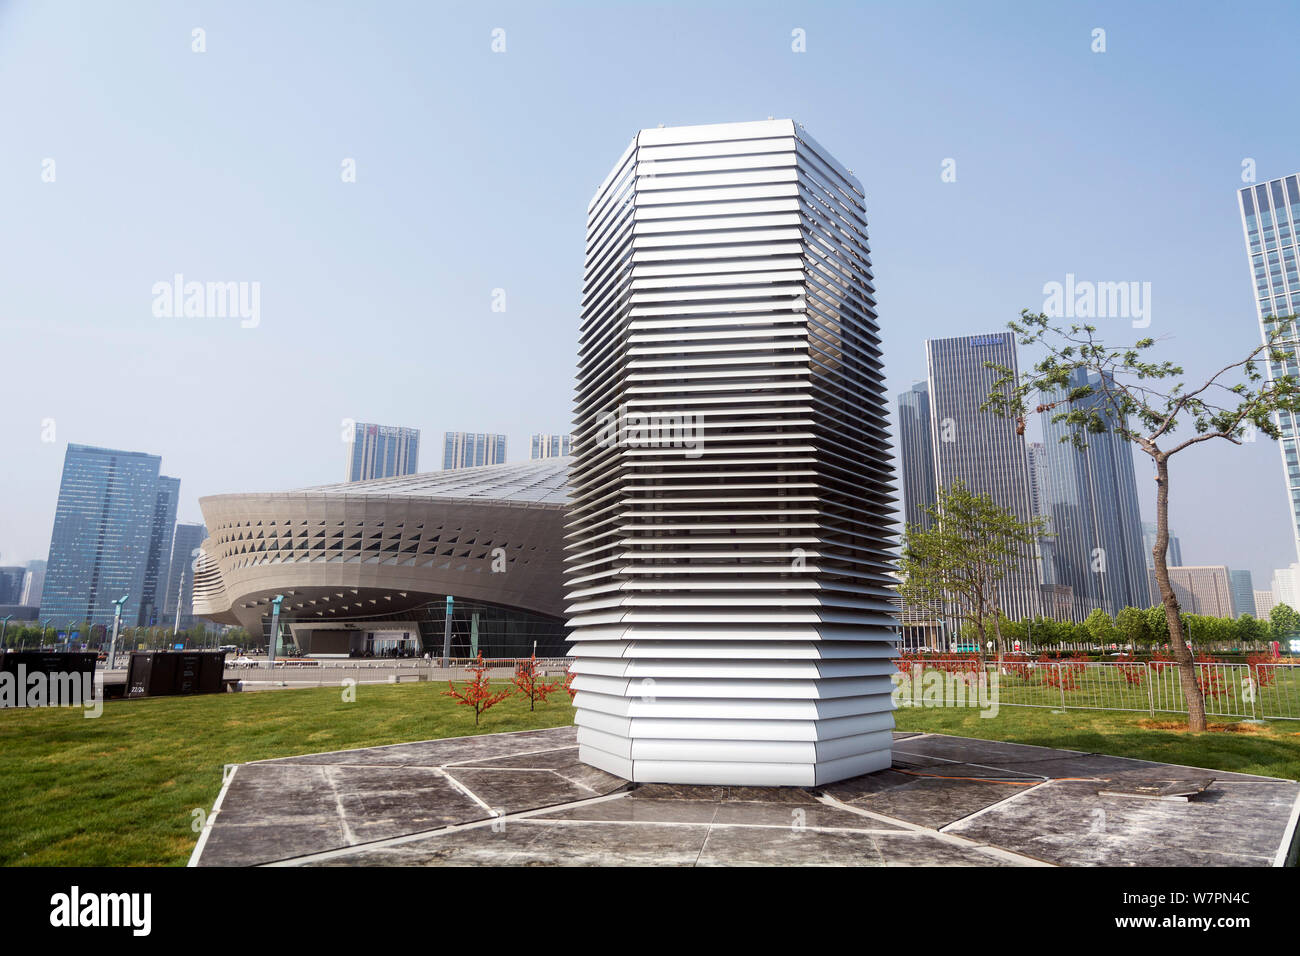 The world's largest air purifier "smog filtering tower" (smog free tower) is pictured outside the International Conference Center in Dalian cit Stock Photo -